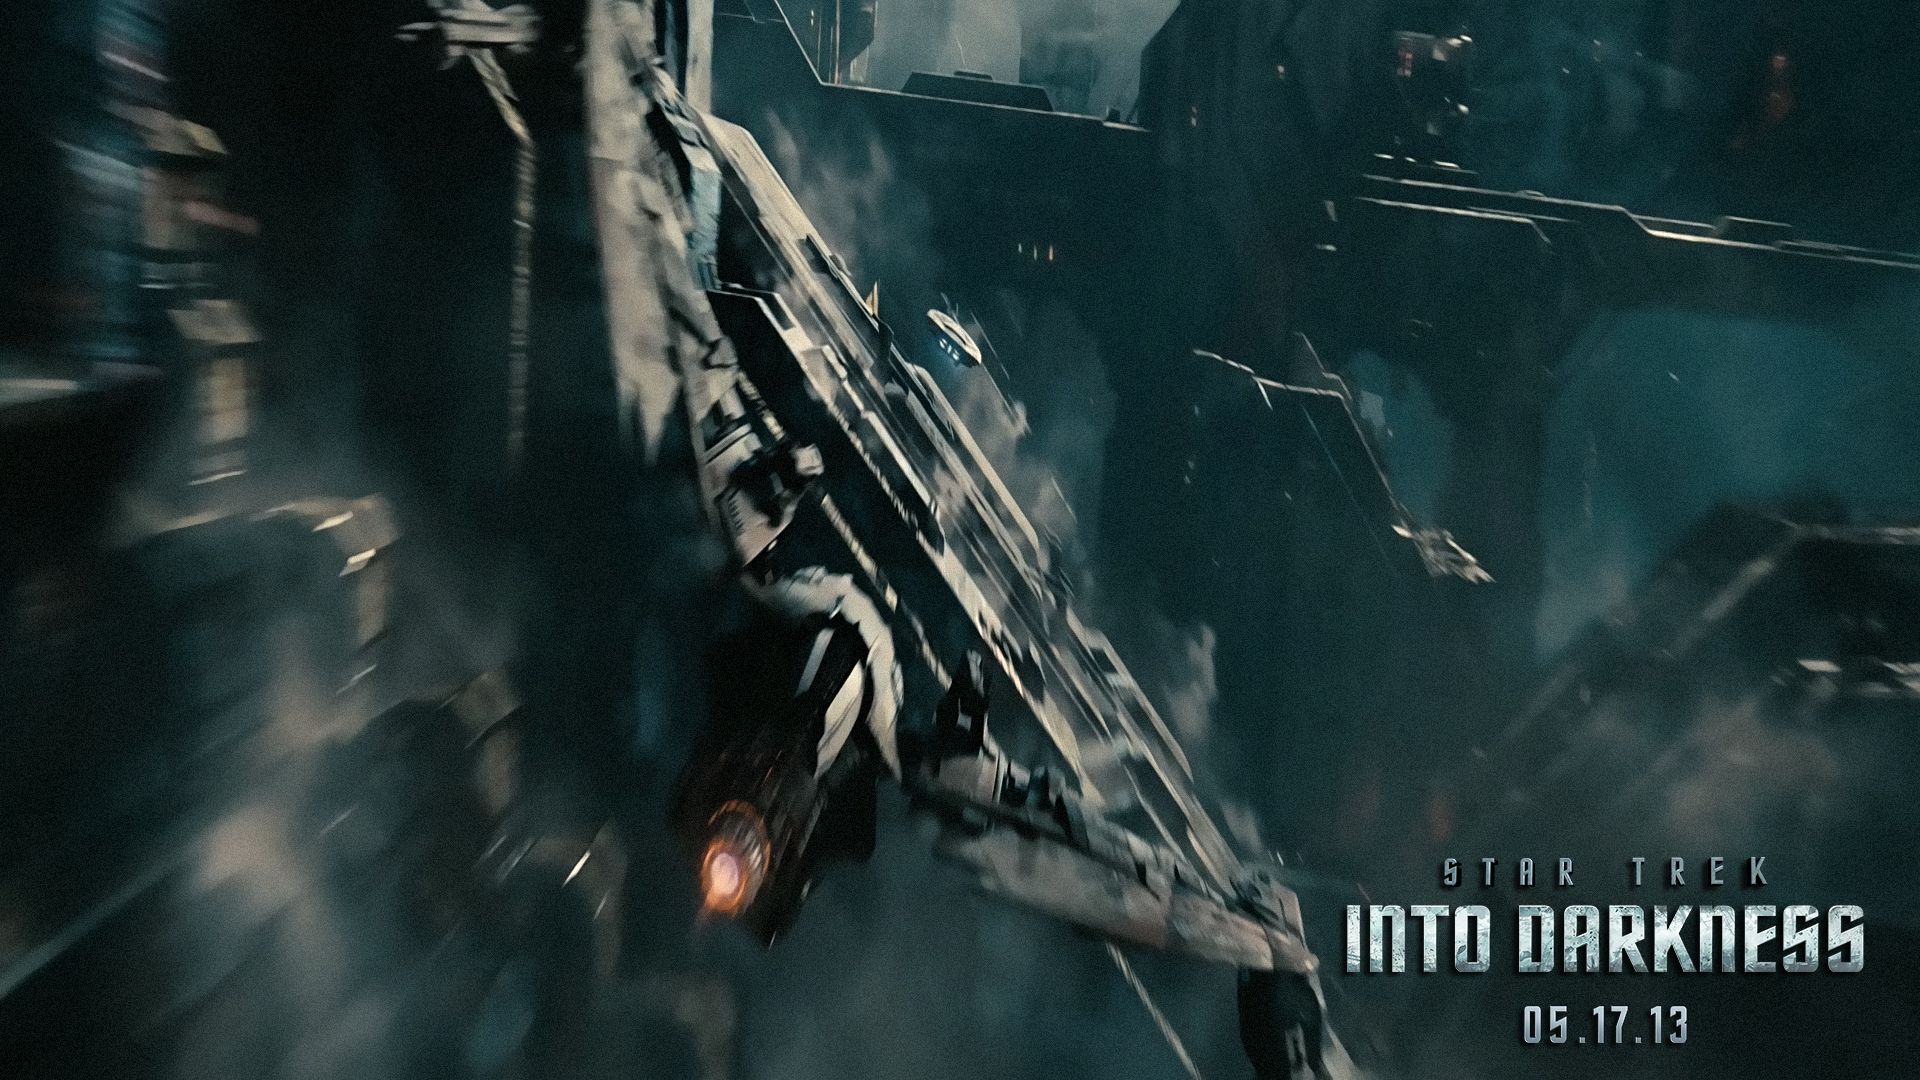 Free download Star Trek Into Darkness Wallpaper and Theme for Windows 7 and Windows [1920x1080] for your Desktop, Mobile & Tablet. Explore Star Trek Into Darkness Wallpaper